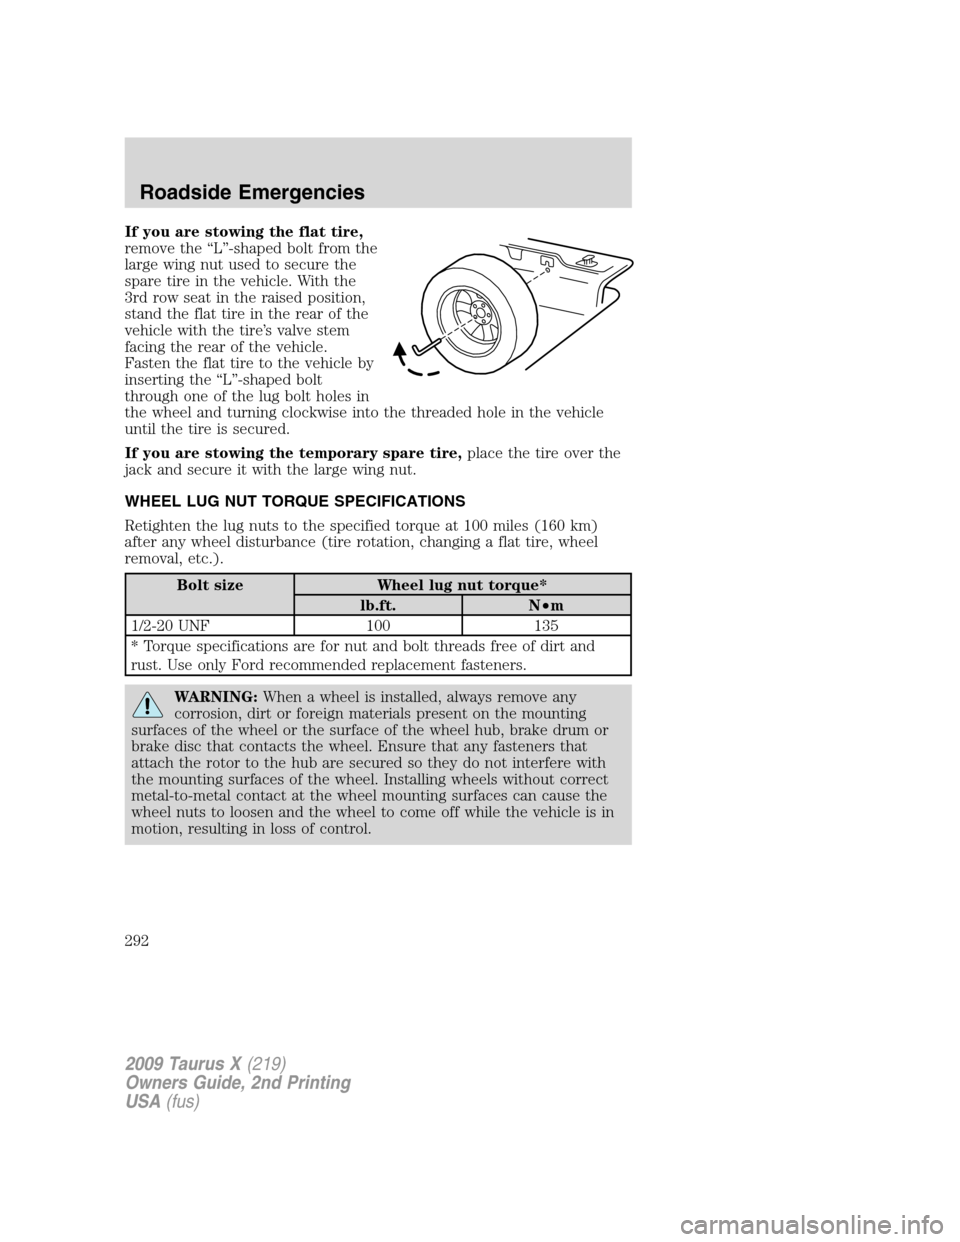 FORD TAURUS X 2009 1.G Repair Manual If you are stowing the flat tire,
remove the “L”-shaped bolt from the
large wing nut used to secure the
spare tire in the vehicle. With the
3rd row seat in the raised position,
stand the flat tire